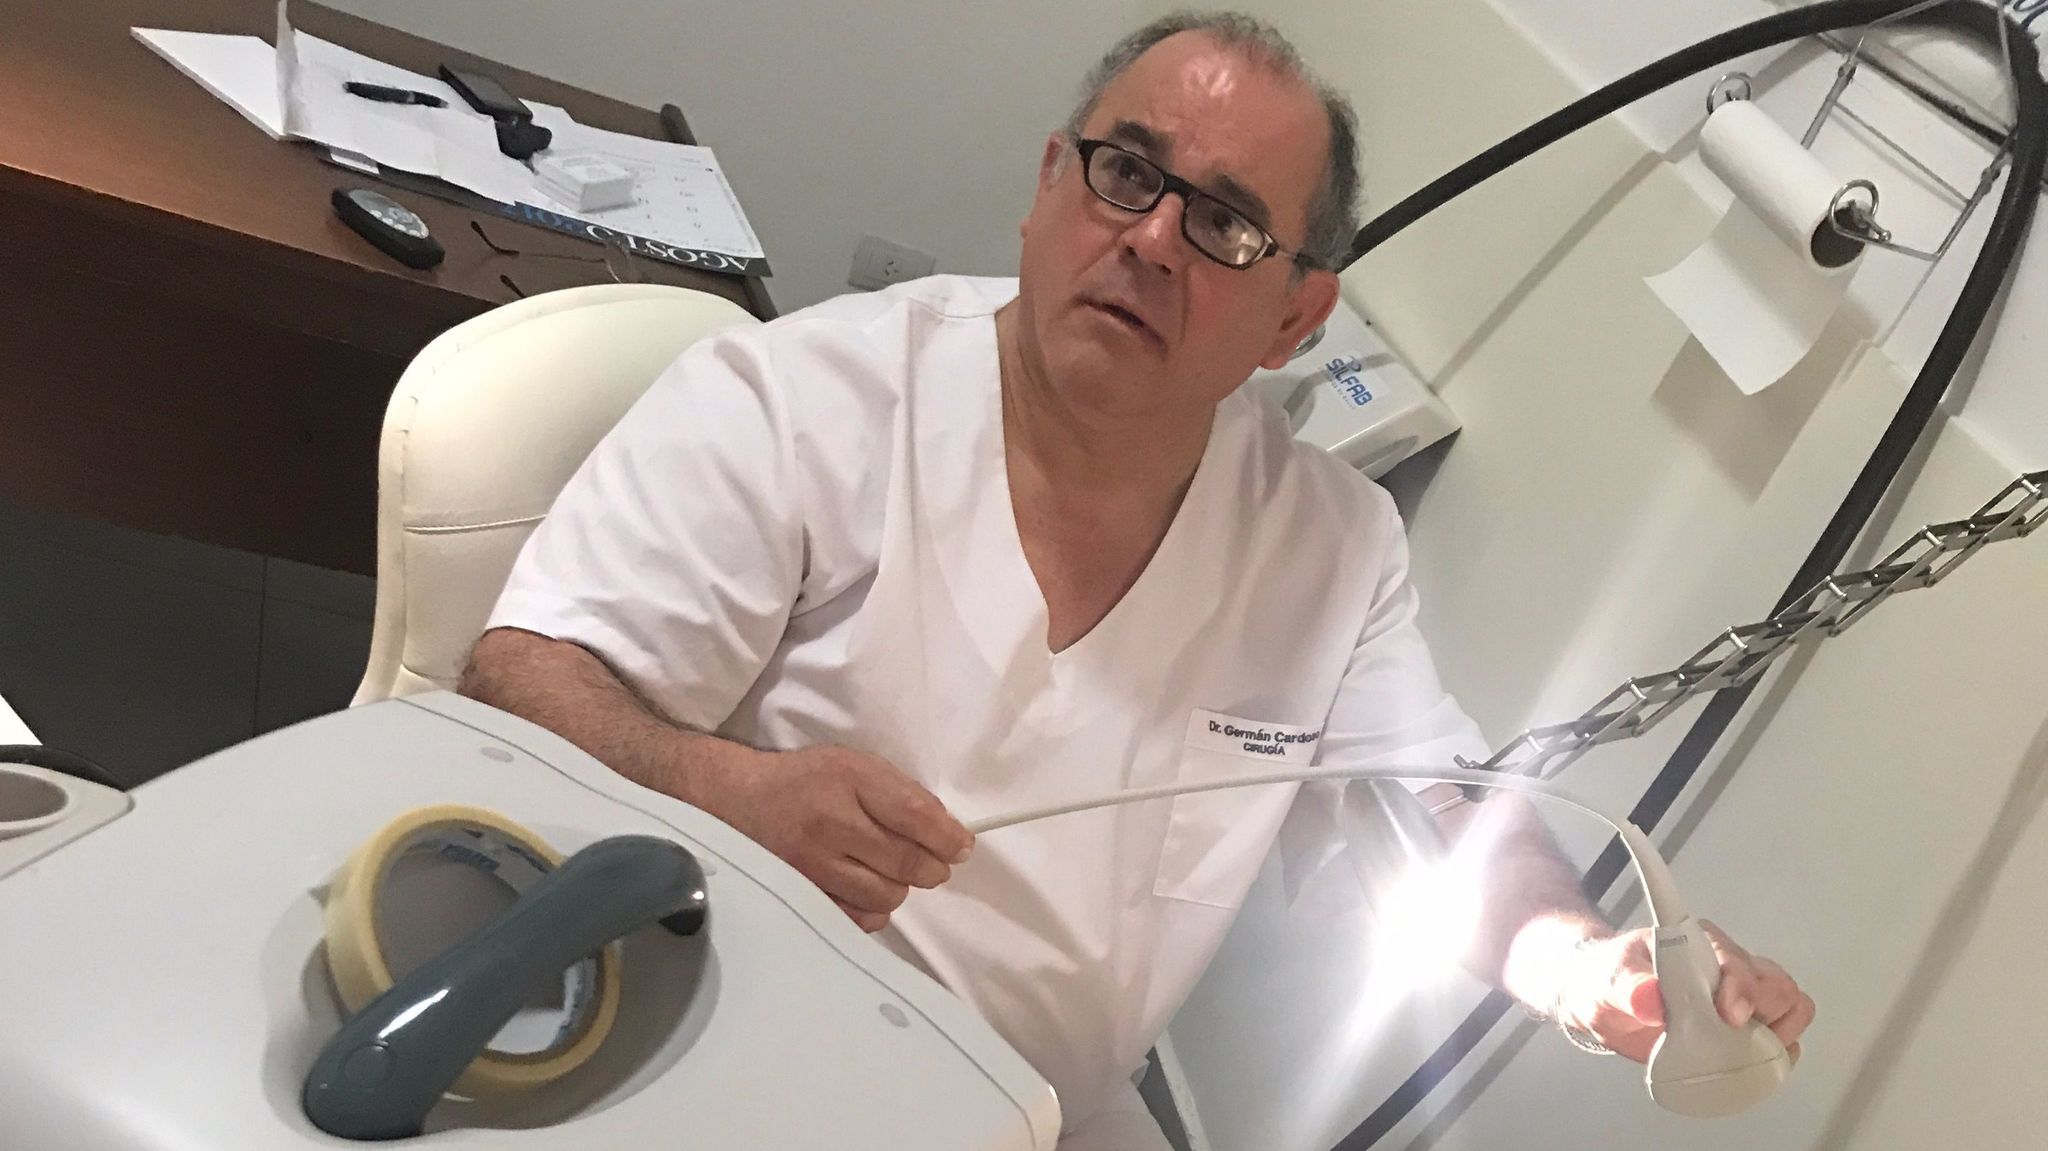 Dr. German Cardoso performs abortions in Tandil to prevent women from ending their pregnancies on their own.